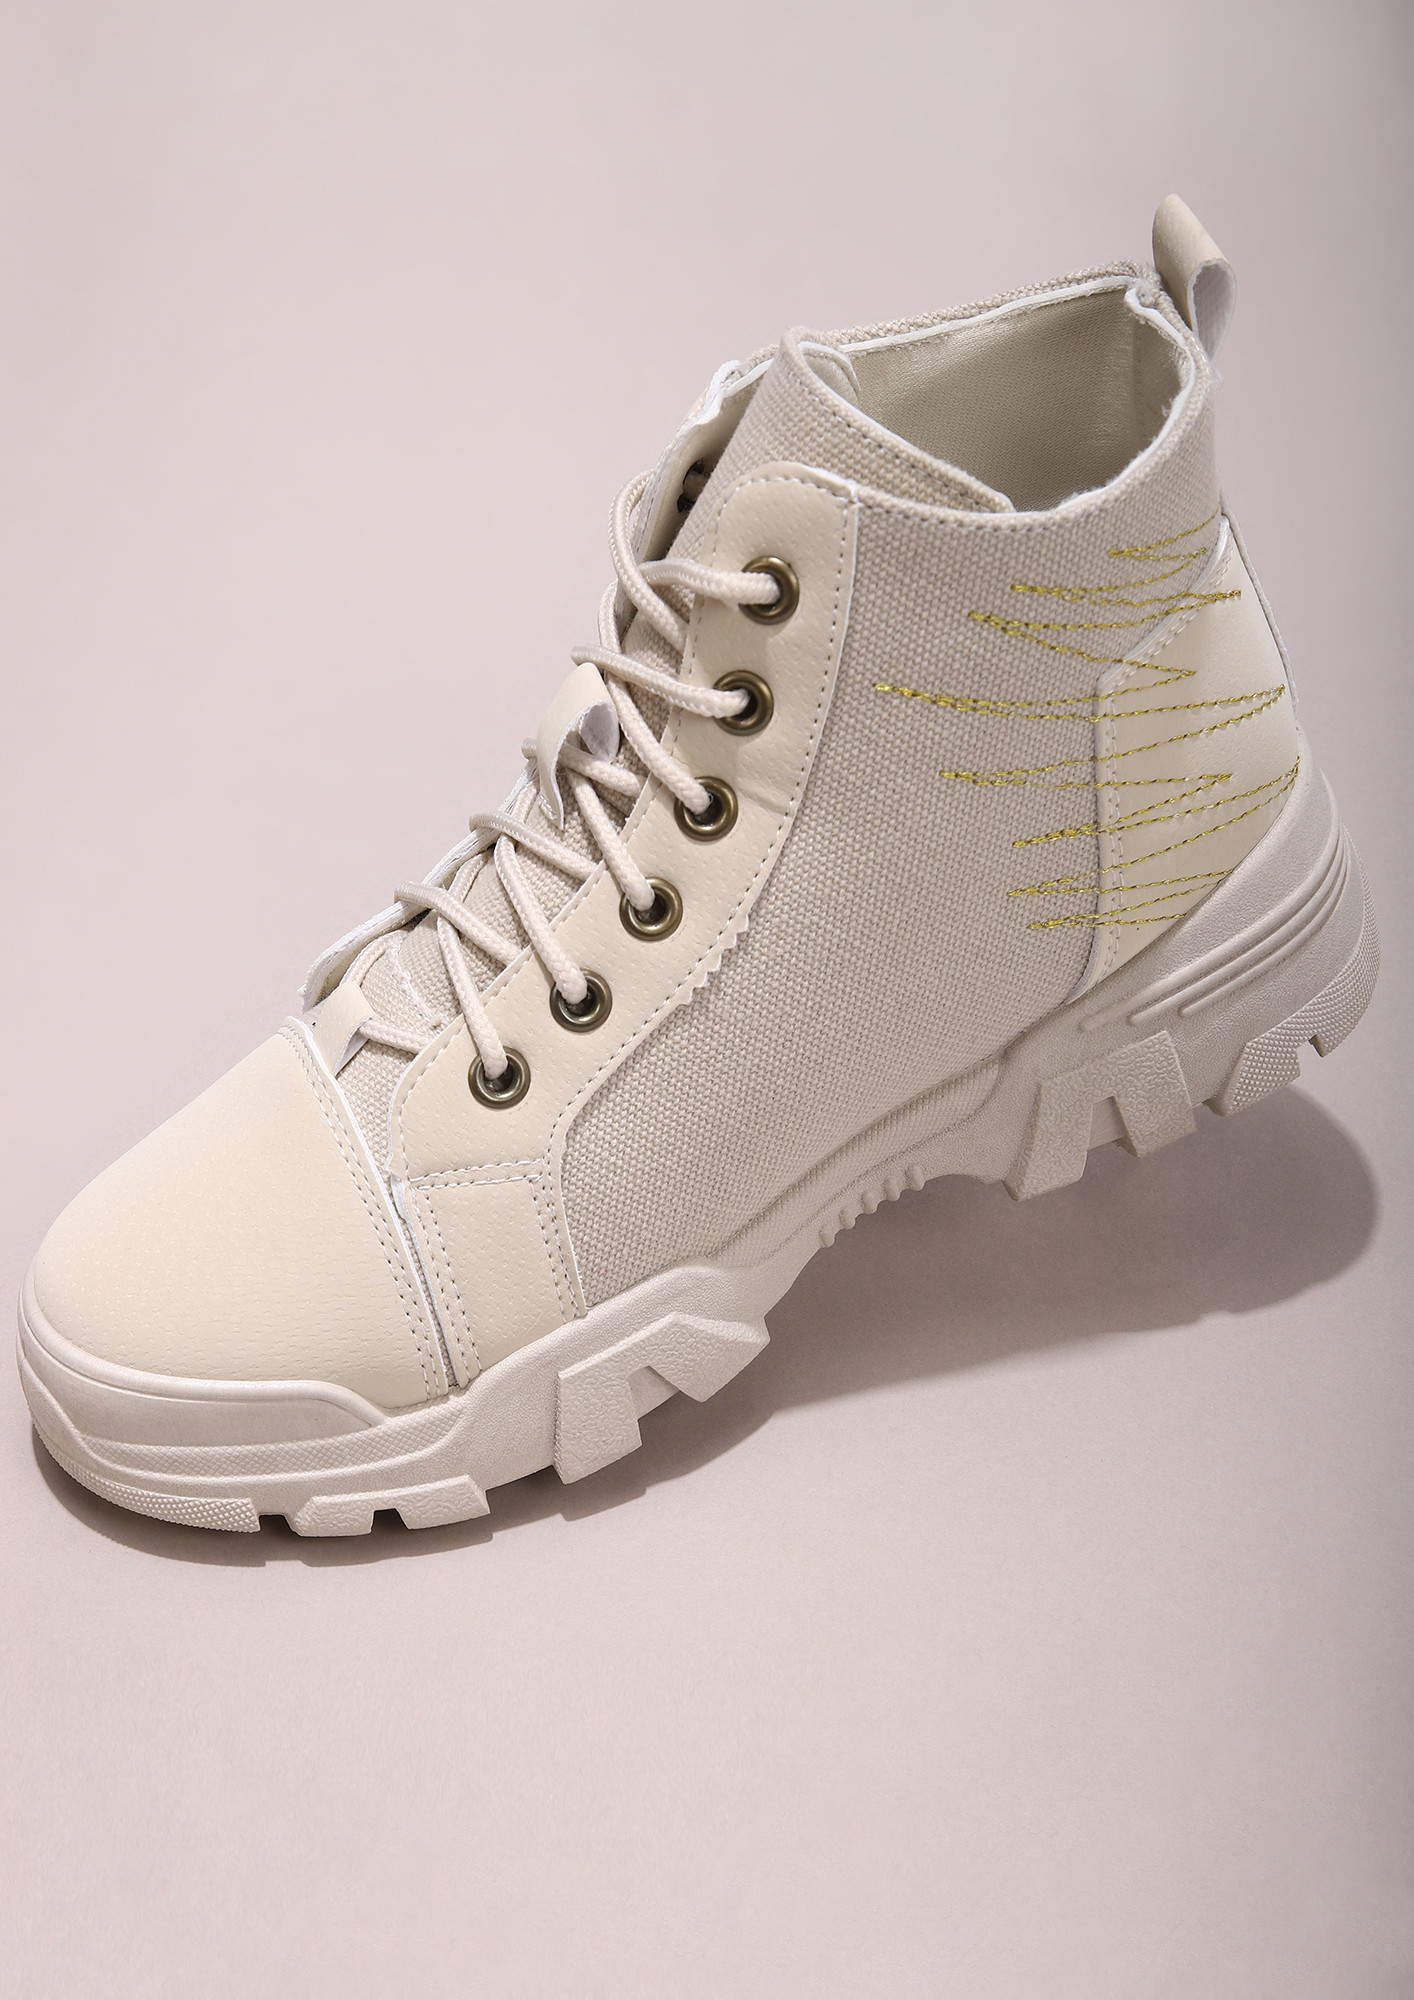 SNEAKER-BOOTS KINDA PERSON BEIGE CASUAL SHOES